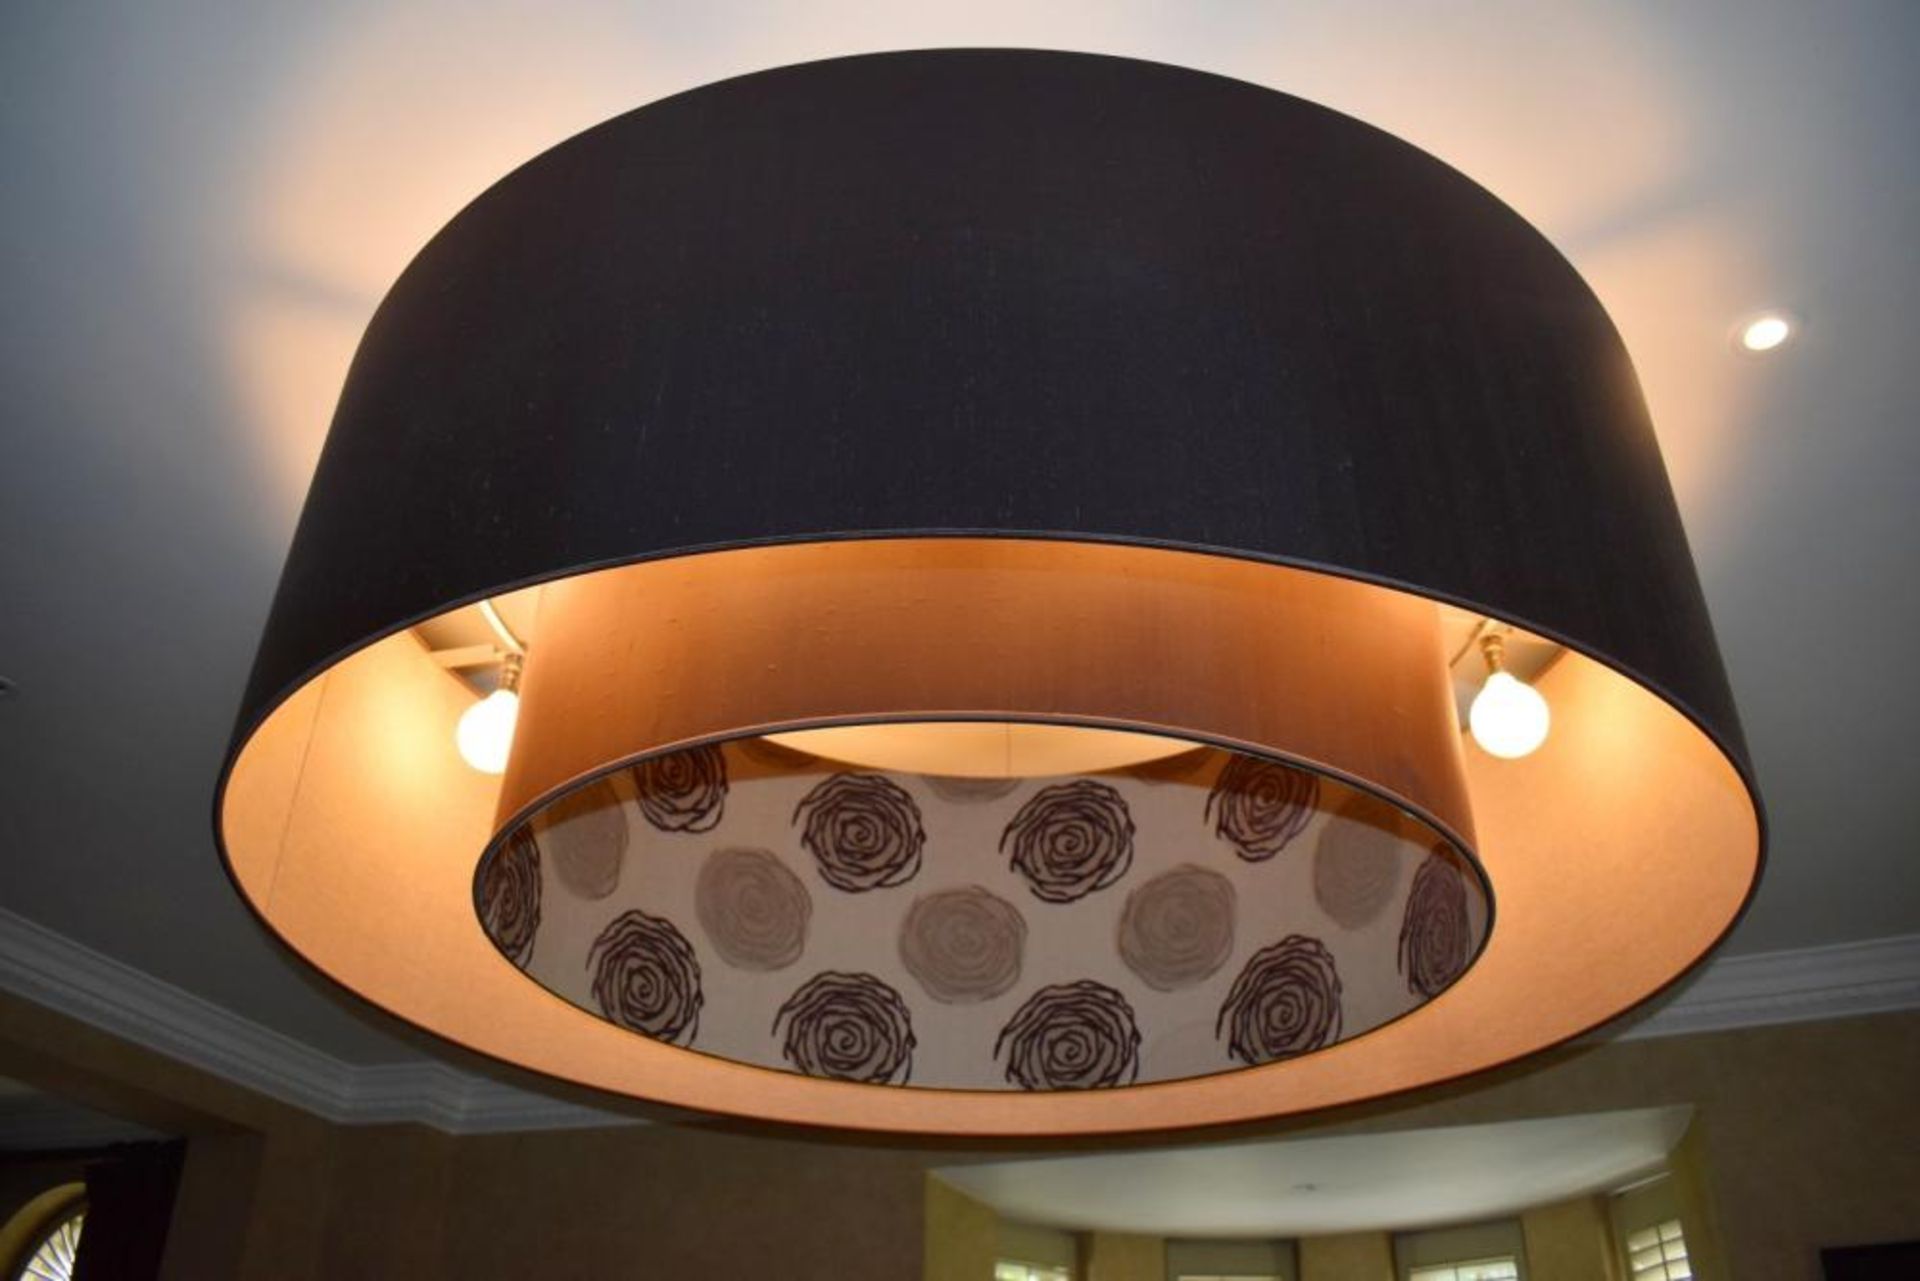 1 x Huge 1.5 Metre Light Fitting Featuring A Double Shade - Dimensions: 150cm Diamter, 50cm Height - Image 5 of 7